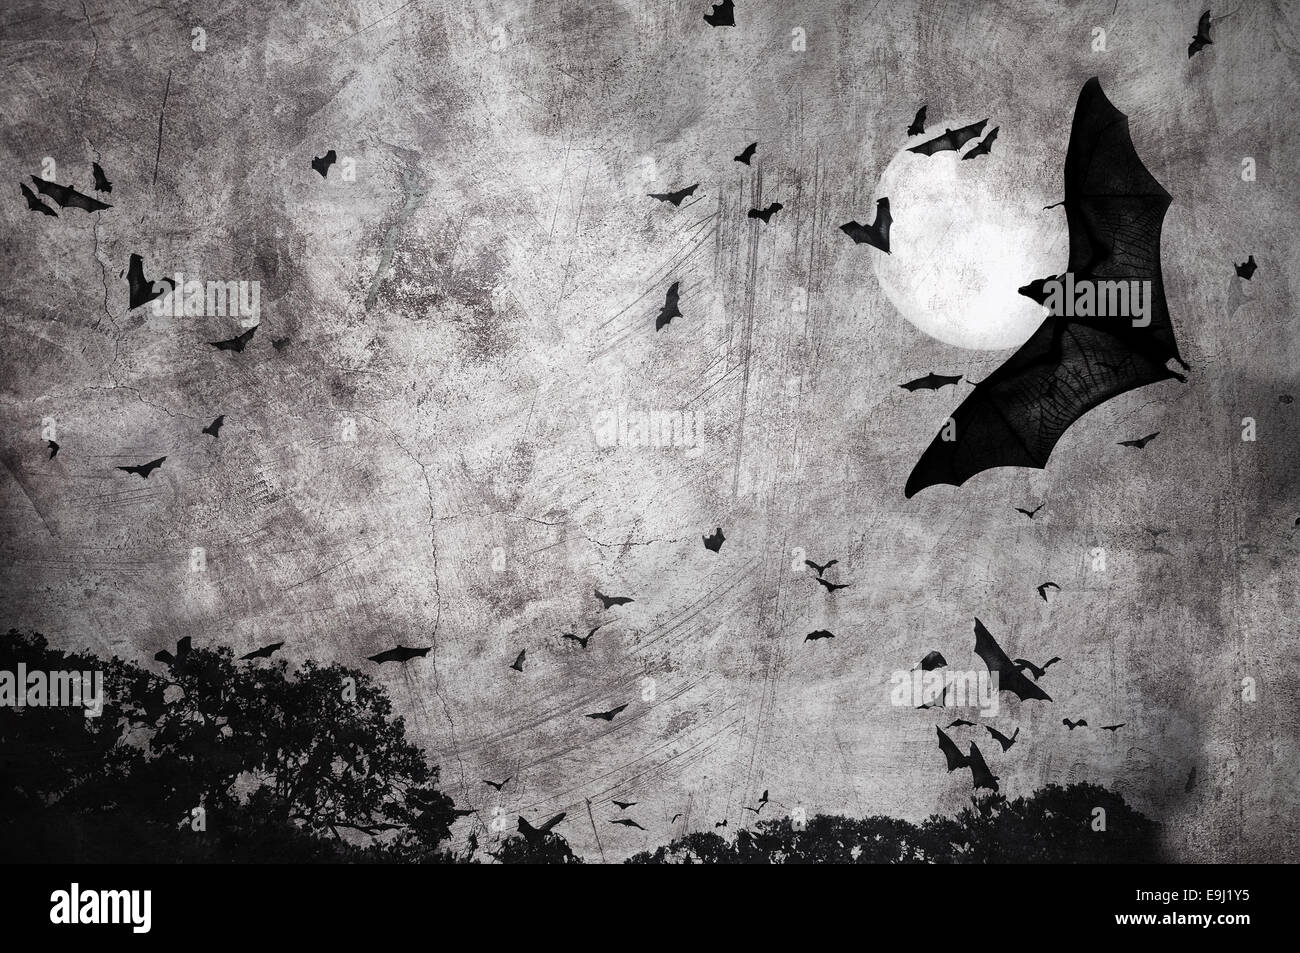 bats in the dark cloudy sky, perfect halloween background Stock Photo